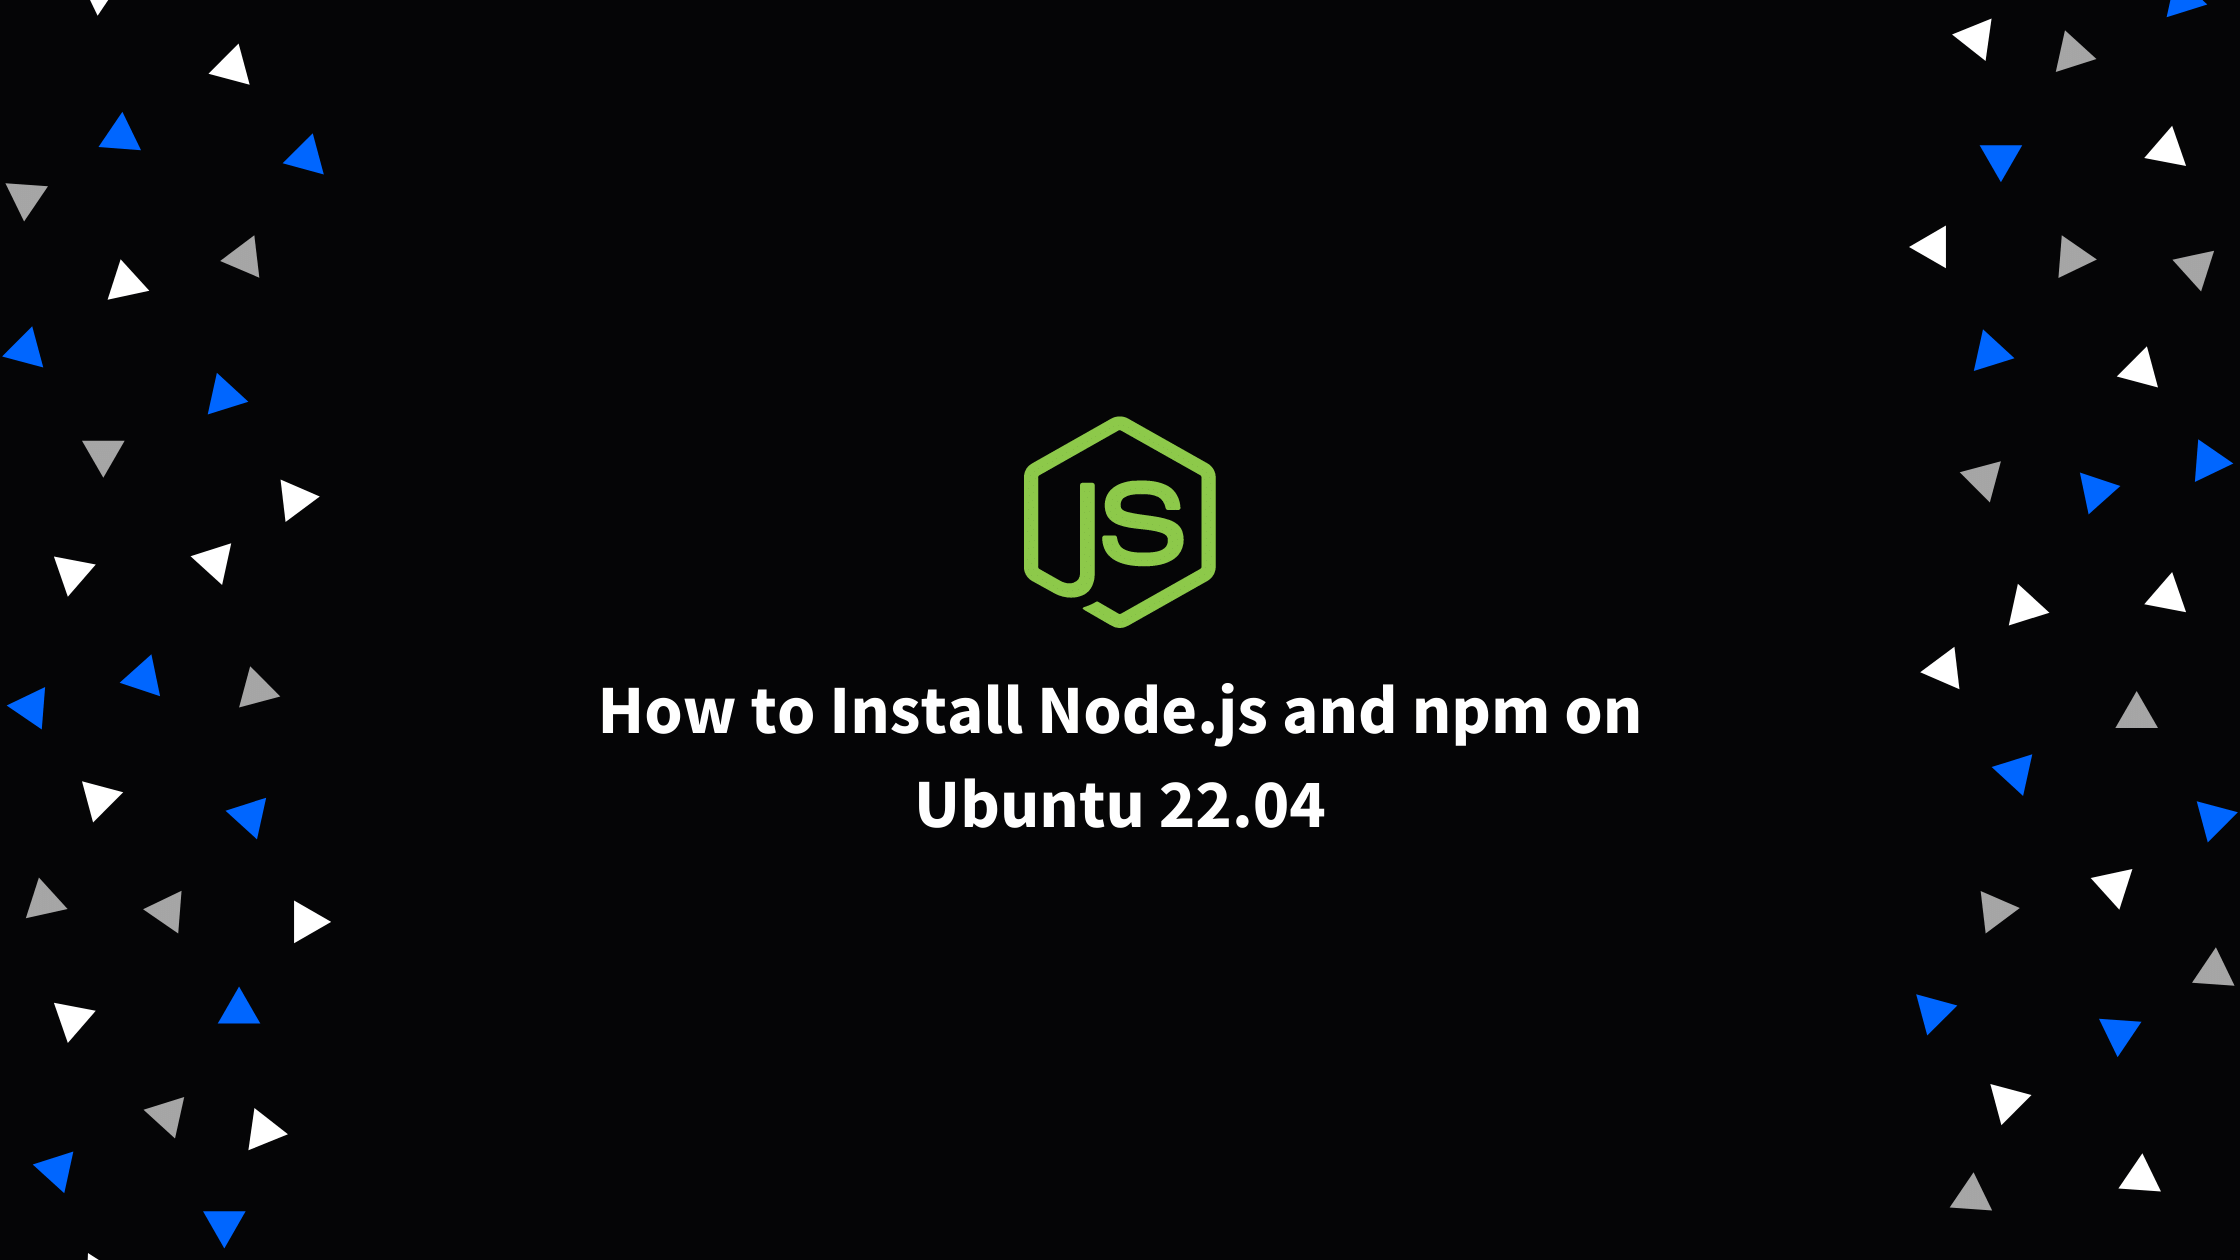 How To Install Node.Js And Npm On Ubuntu 22.04